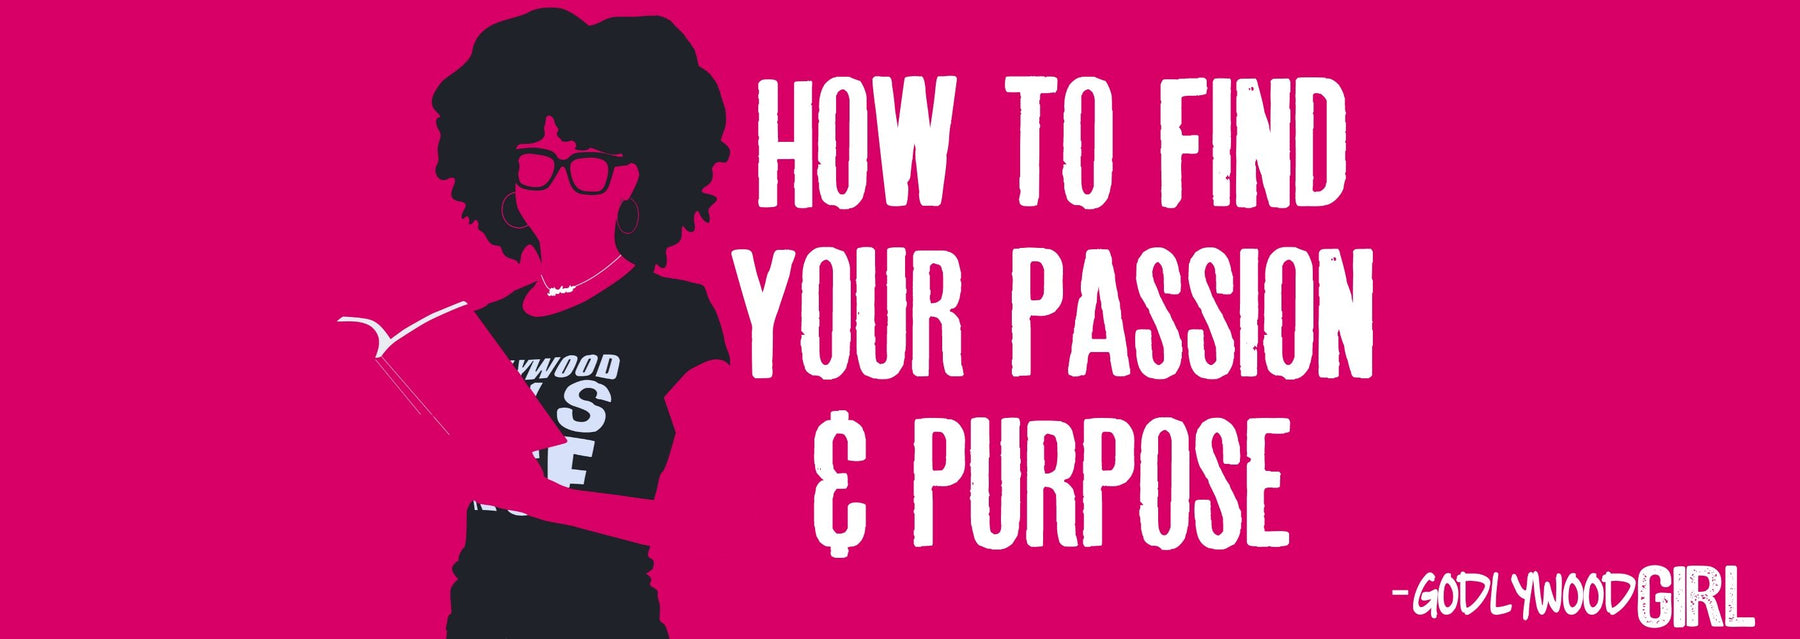 How To Find Your Purpose And Passion In Life || (And Know Your Life Purpose In 5 Minutes)